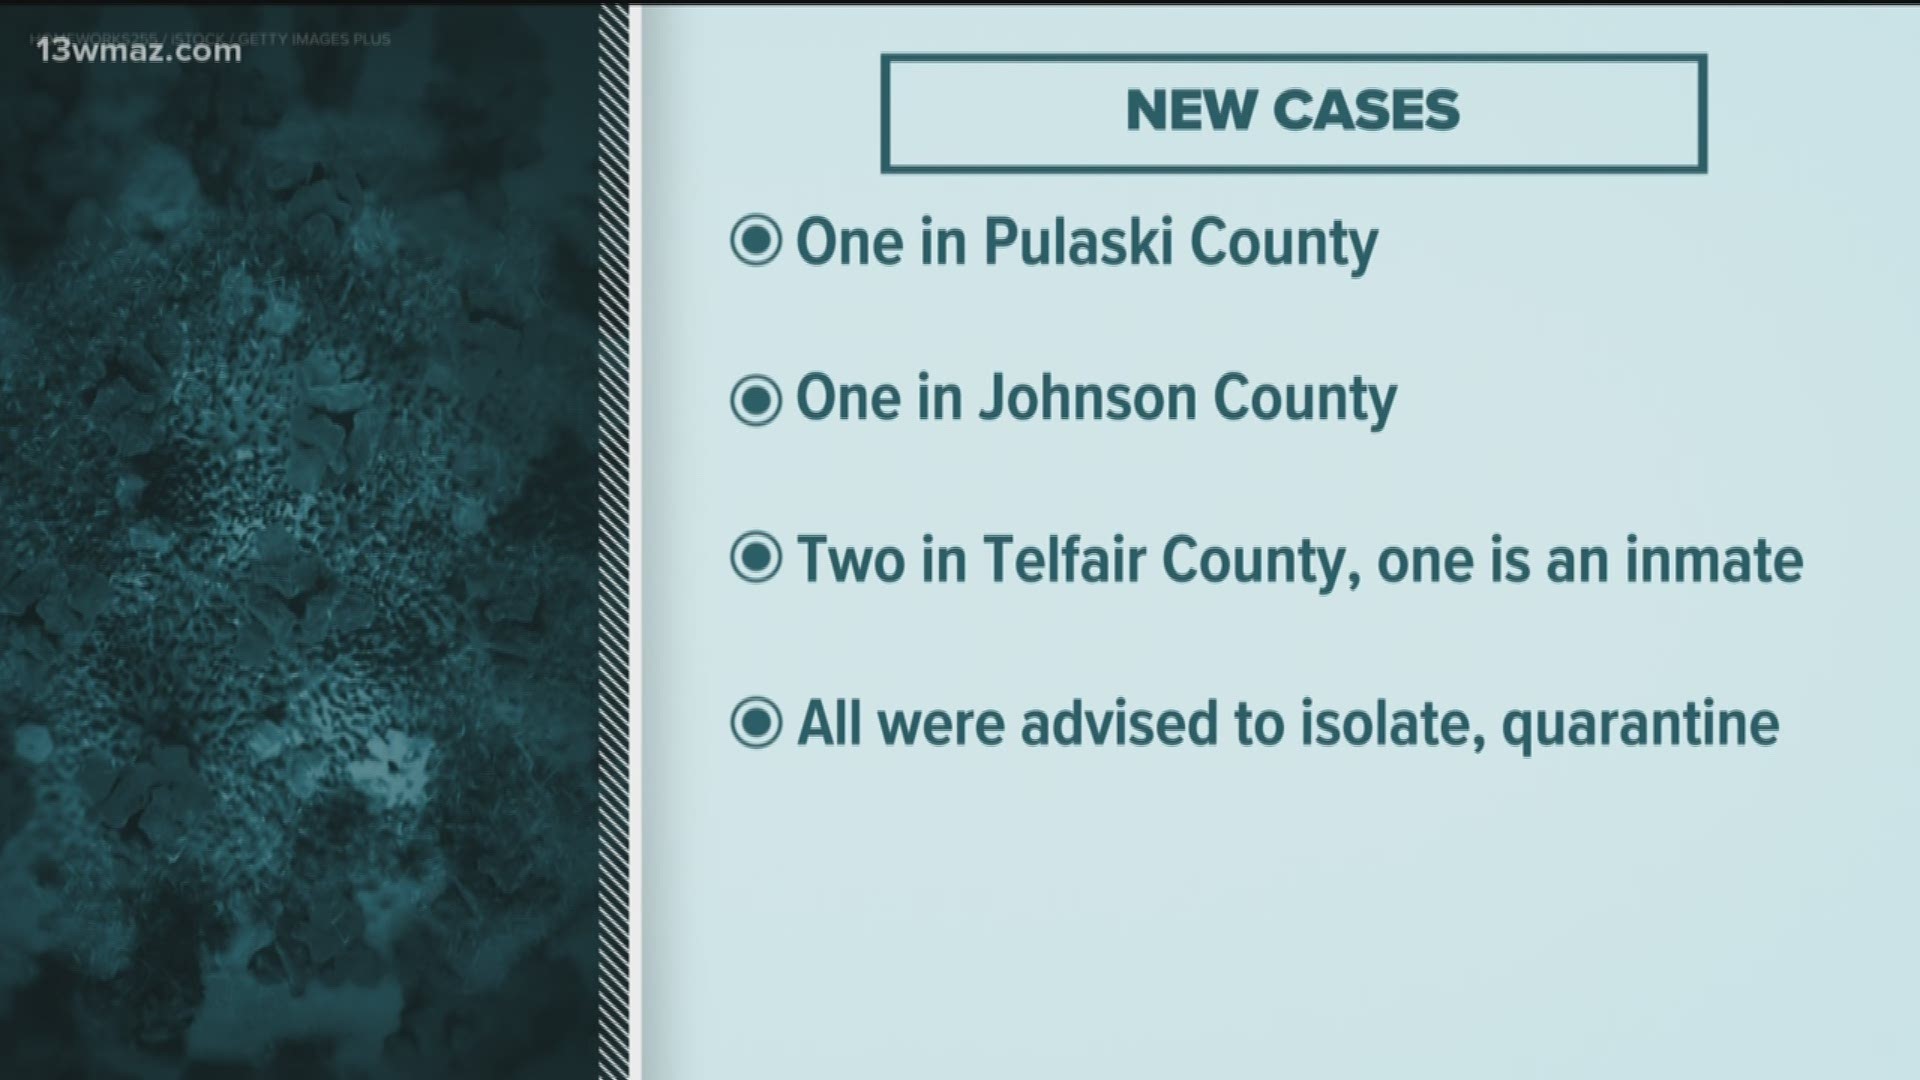 The Department of Public Health's South Central Health District says one person is an inmate in Telfair County.